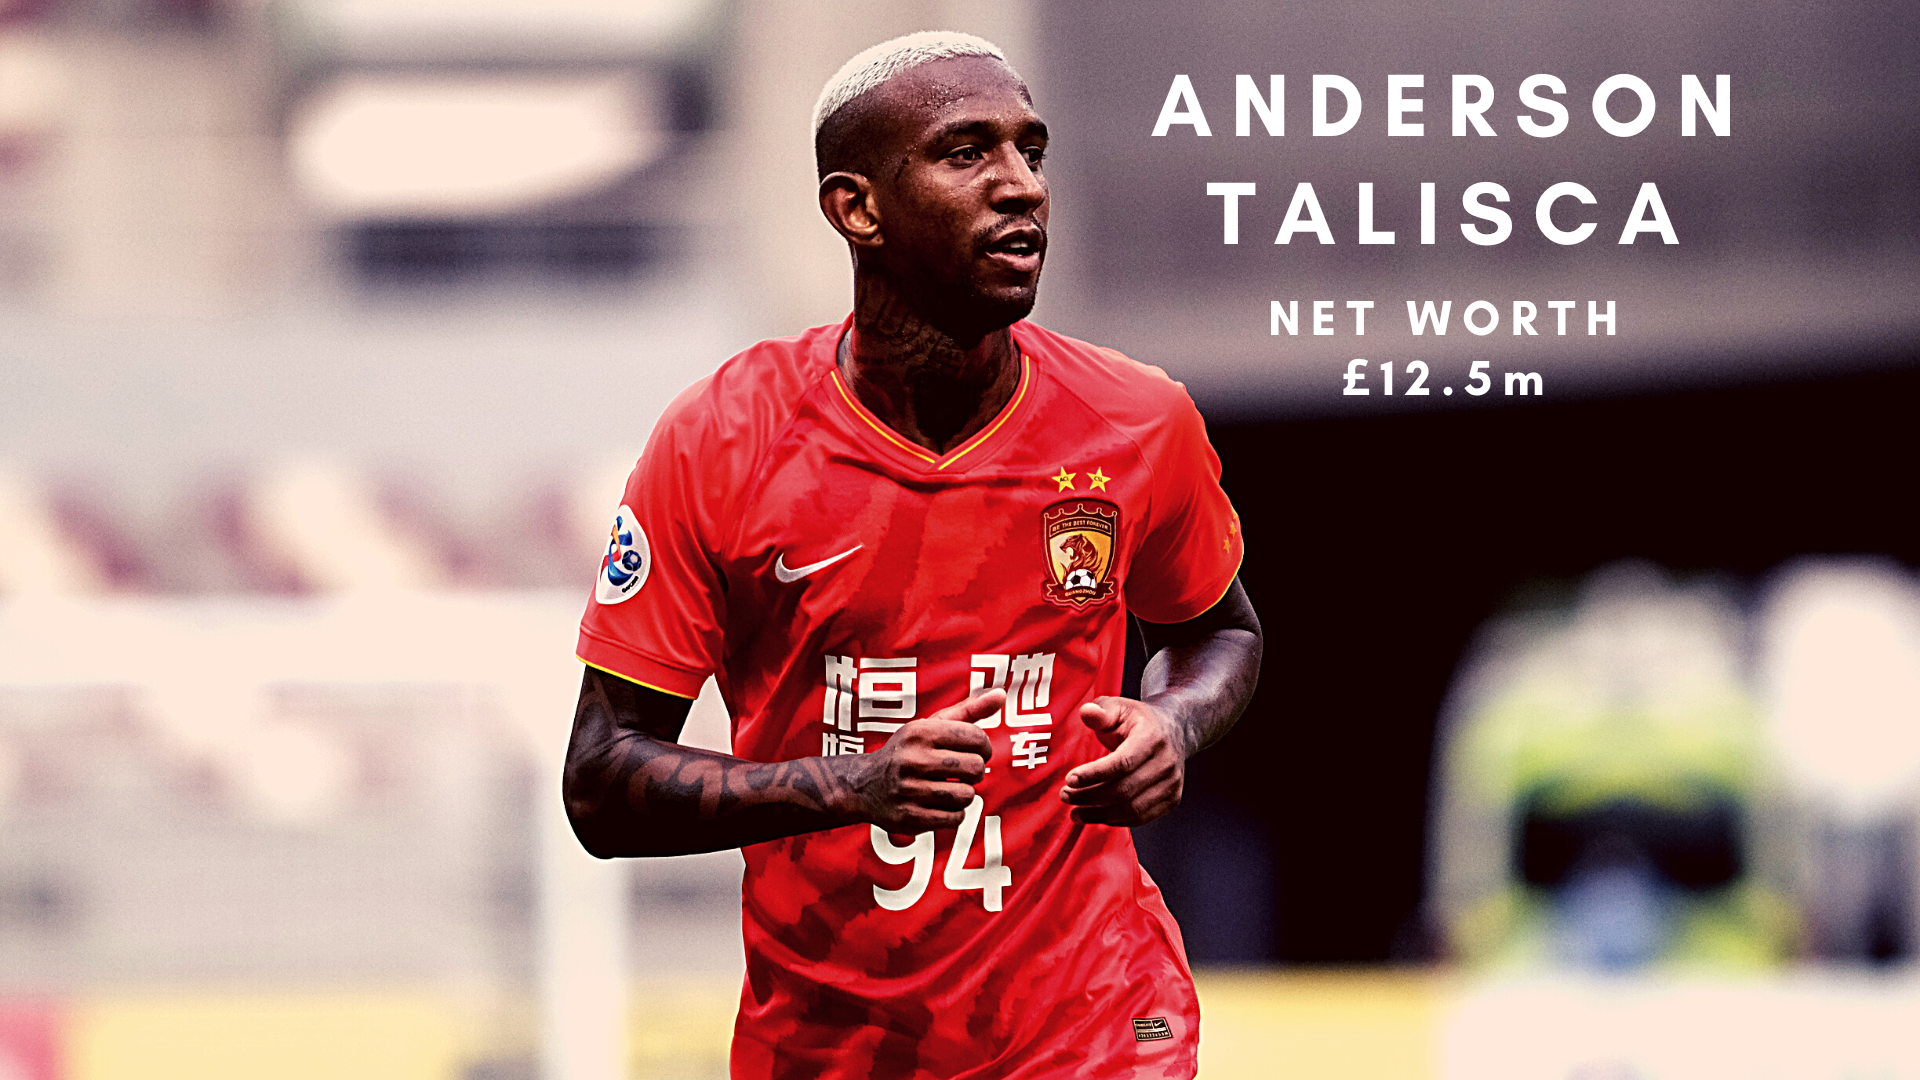 Anderson Talisca in action during the AFC Champions League Group G match between Guangzhou Evergrande and Suwon Samsung Bluewings at the Khalifa International Stadium on December 01, 2020 in Doha, Qatar. (Photo by Simon Holmes/Getty Images)